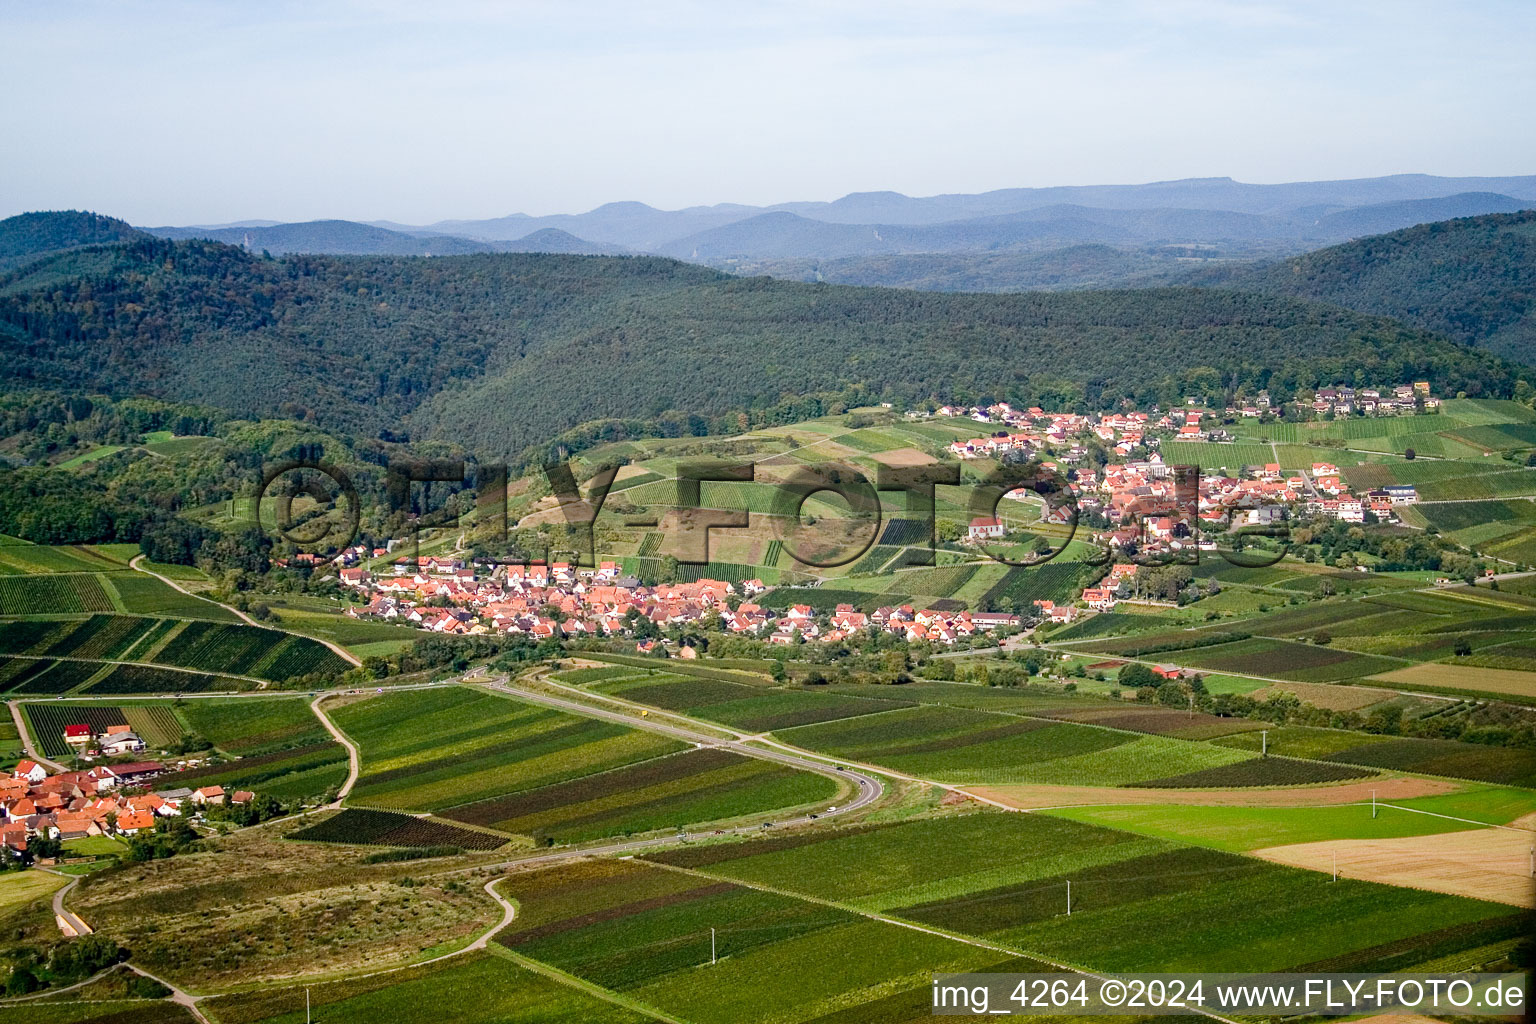 Aerial photograpy of Village - view on the edge of agricultural fields and farmland in Gleiszellen-Gleishorbach in the state Rhineland-Palatinate